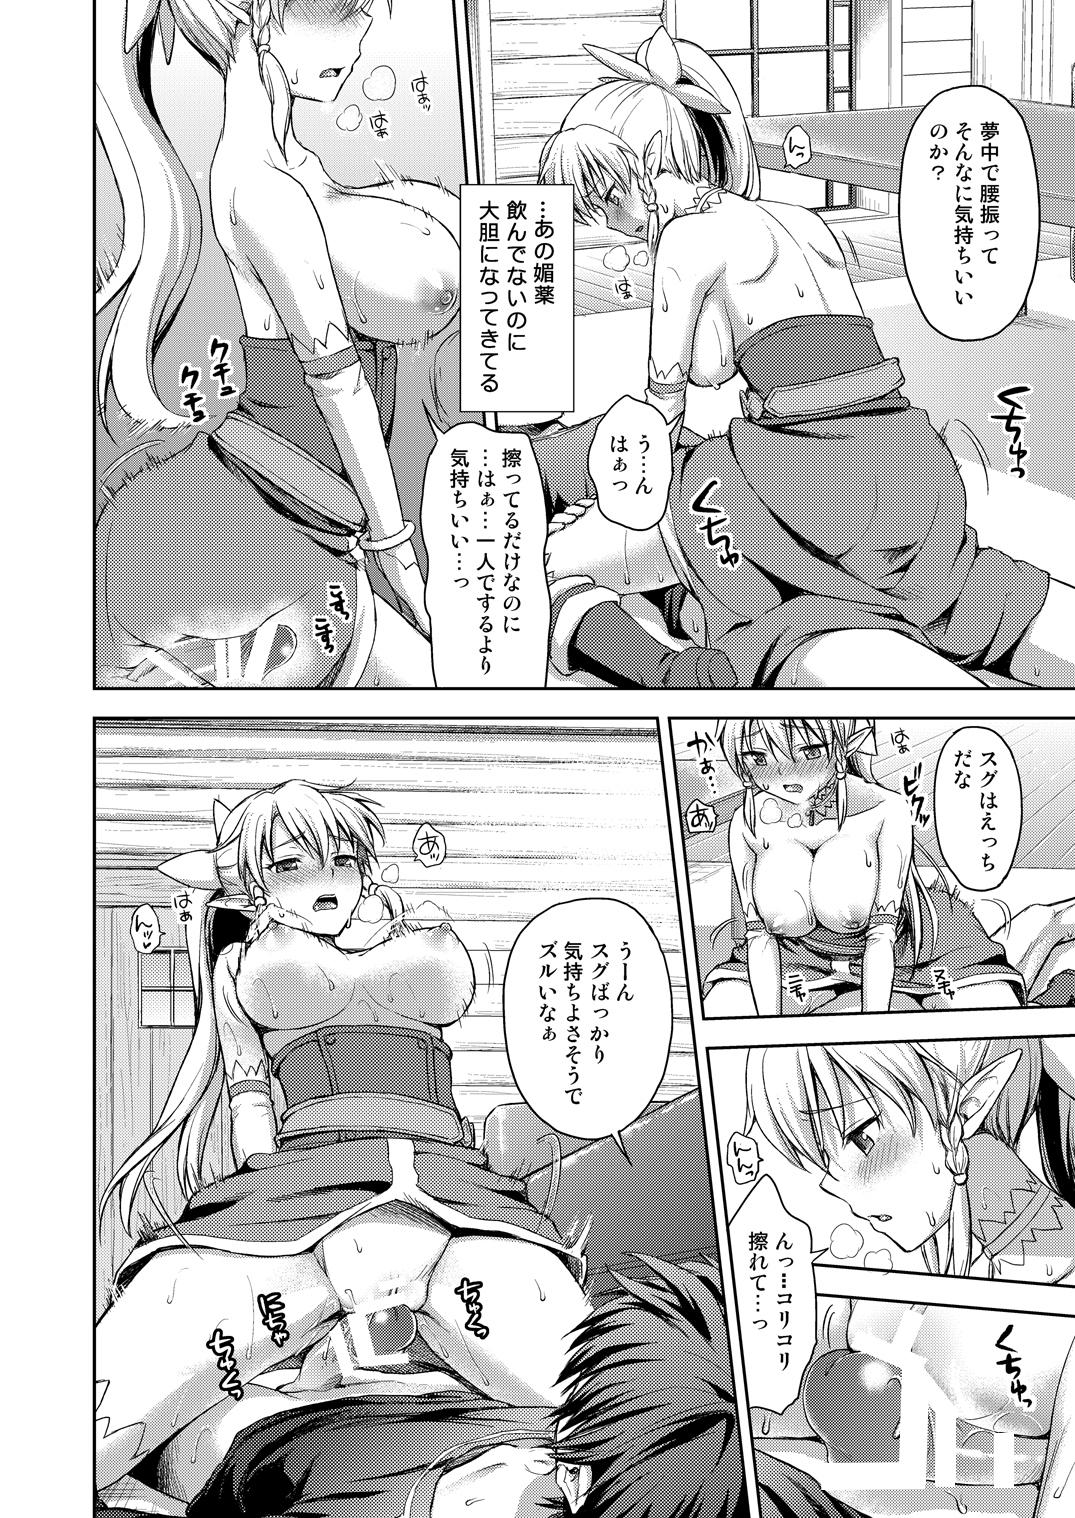 Rica Love Love Potion - Sword art online Step Brother - Page 13